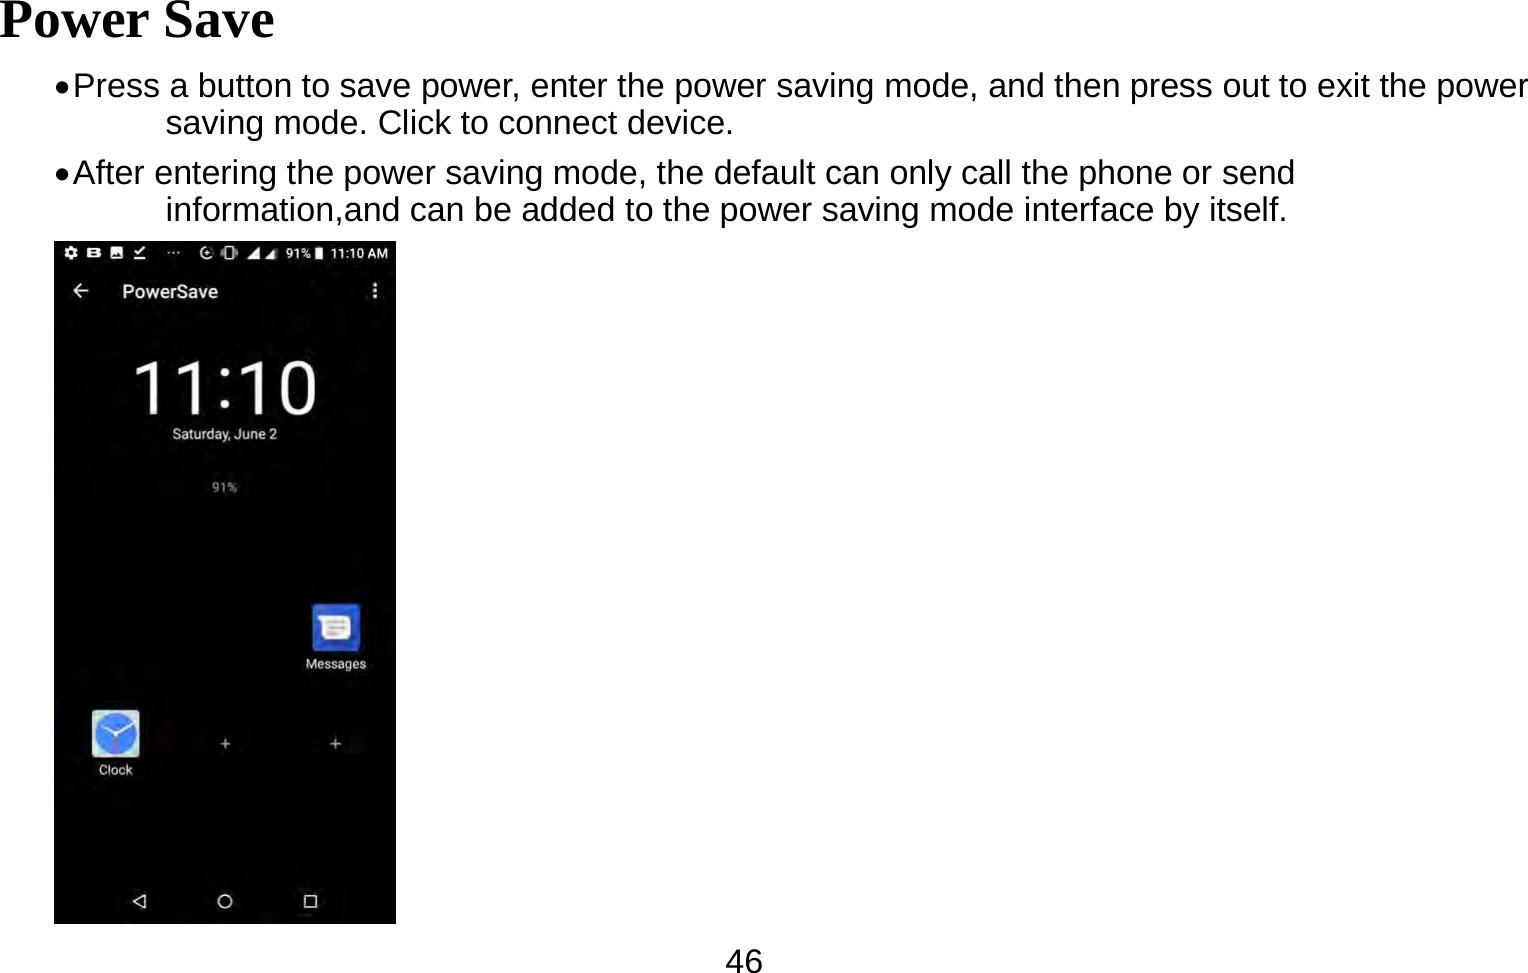   46Power Save  Press a button to save power, enter the power saving mode, and then press out to exit the power saving mode. Click to connect device.  After entering the power saving mode, the default can only call the phone or send   information,and can be added to the power saving mode interface by itself.      